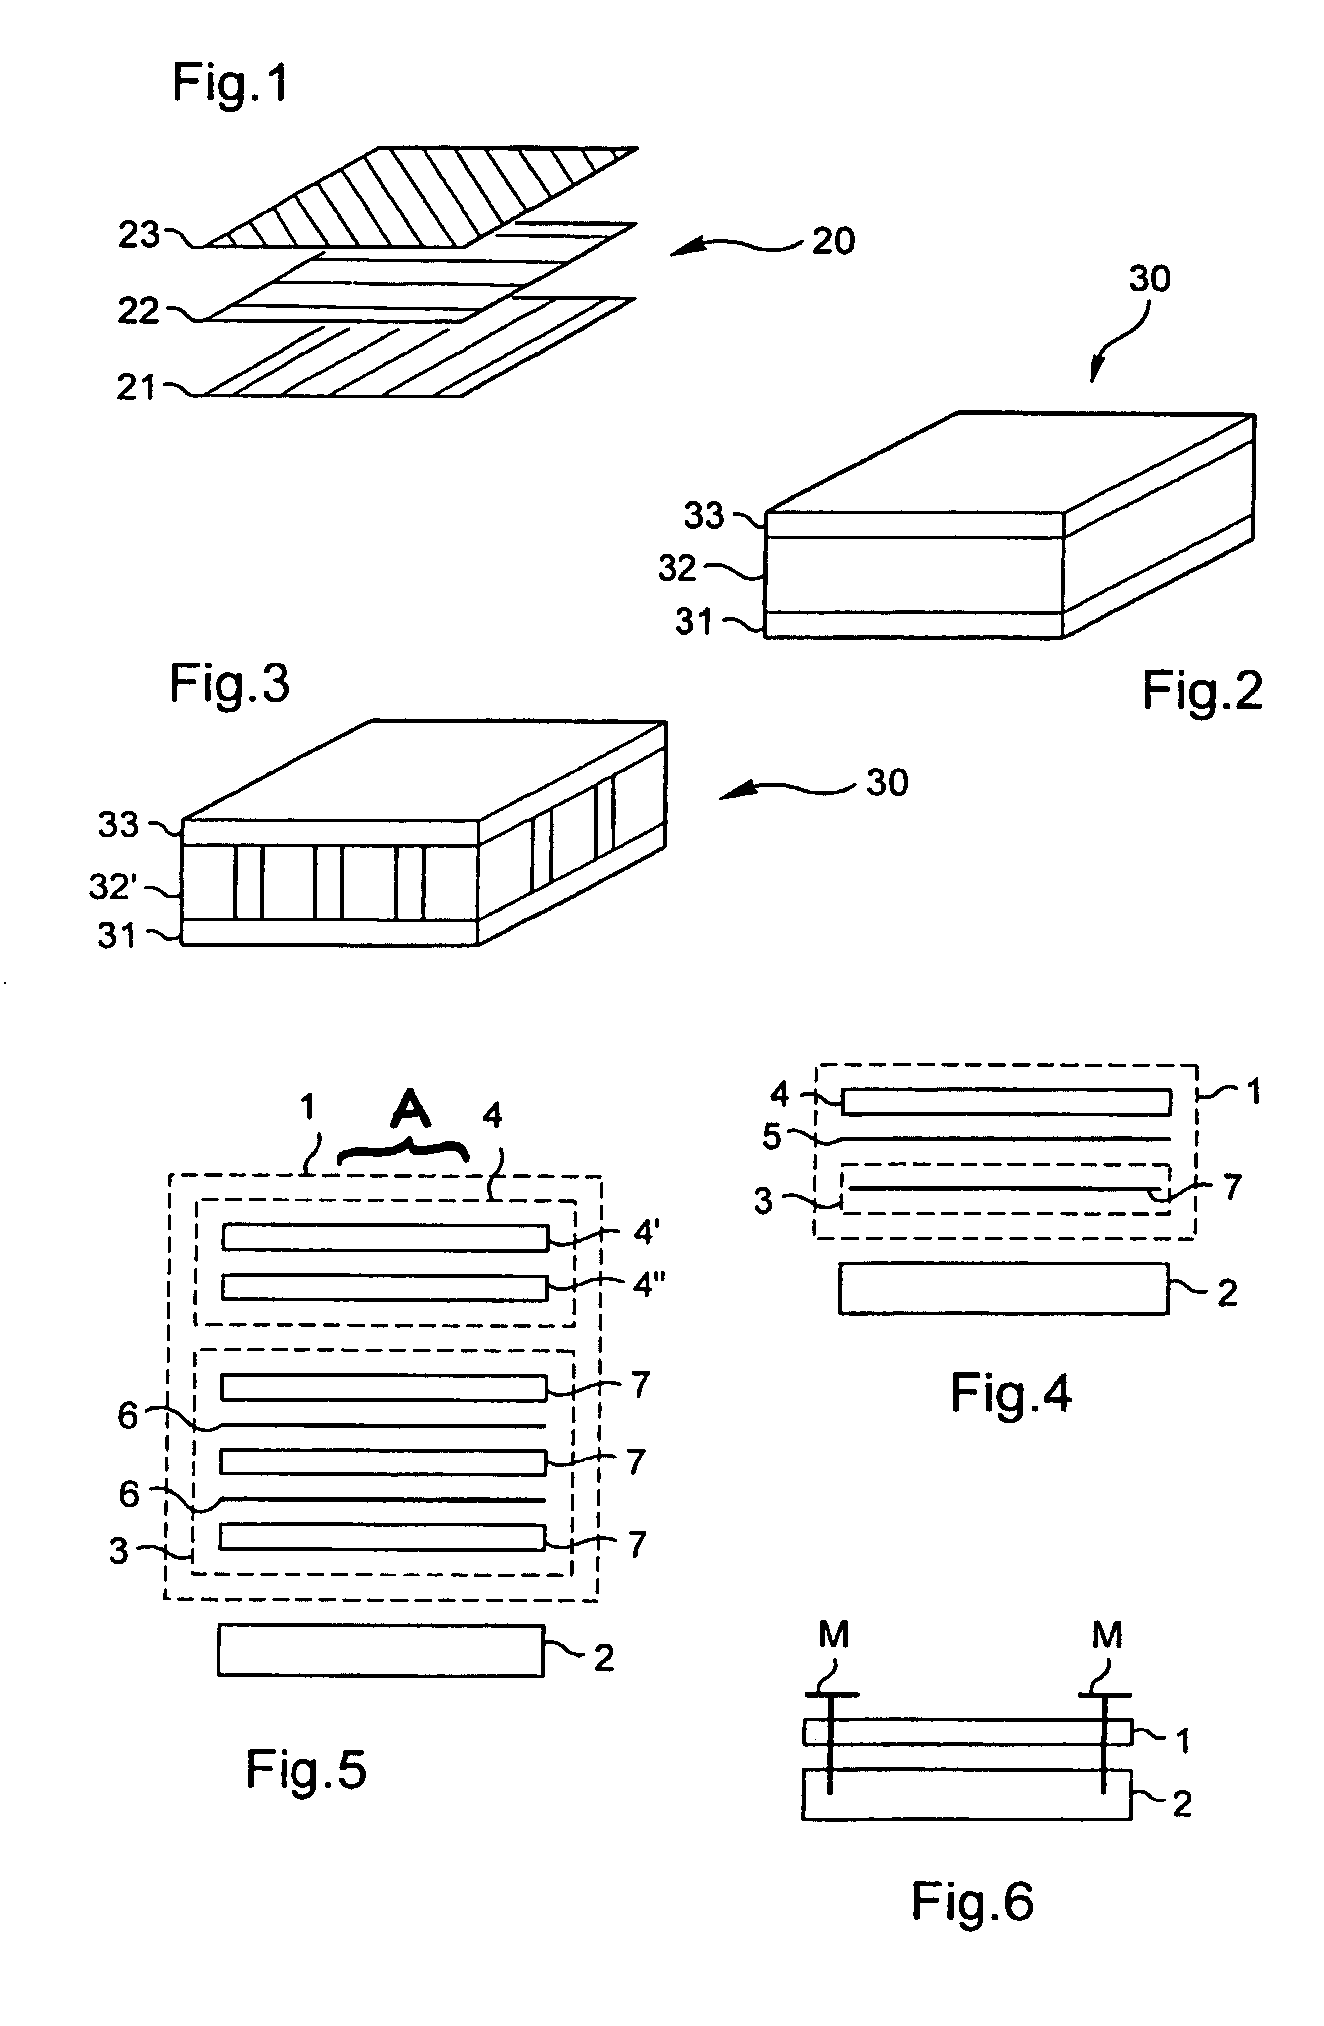 Composite protection for revealing damage to a core in a vehicle such as an aircraft